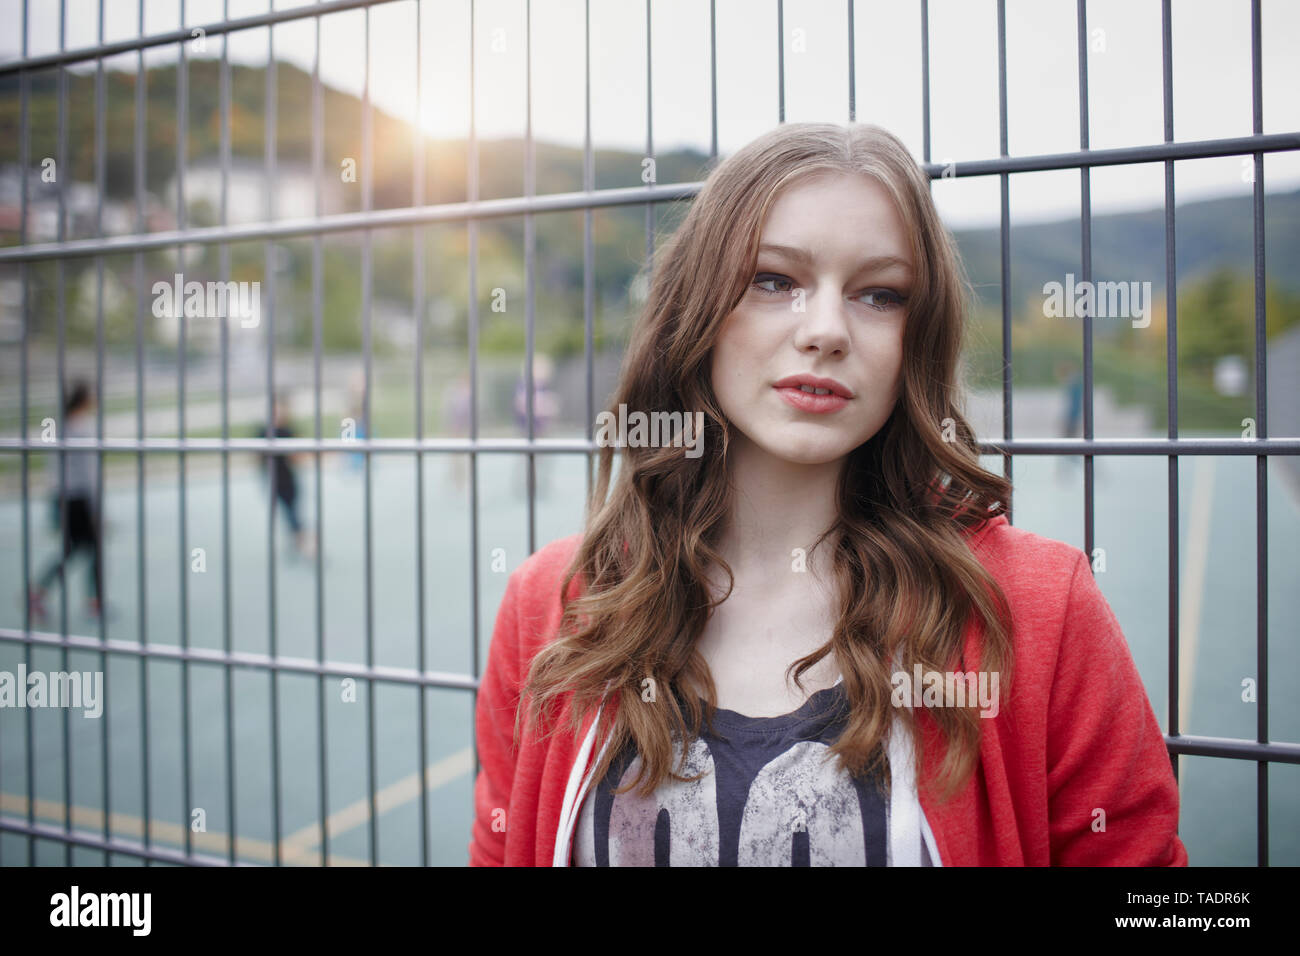 Portrait of teenage girl at a fence at a sports field Stock Photo